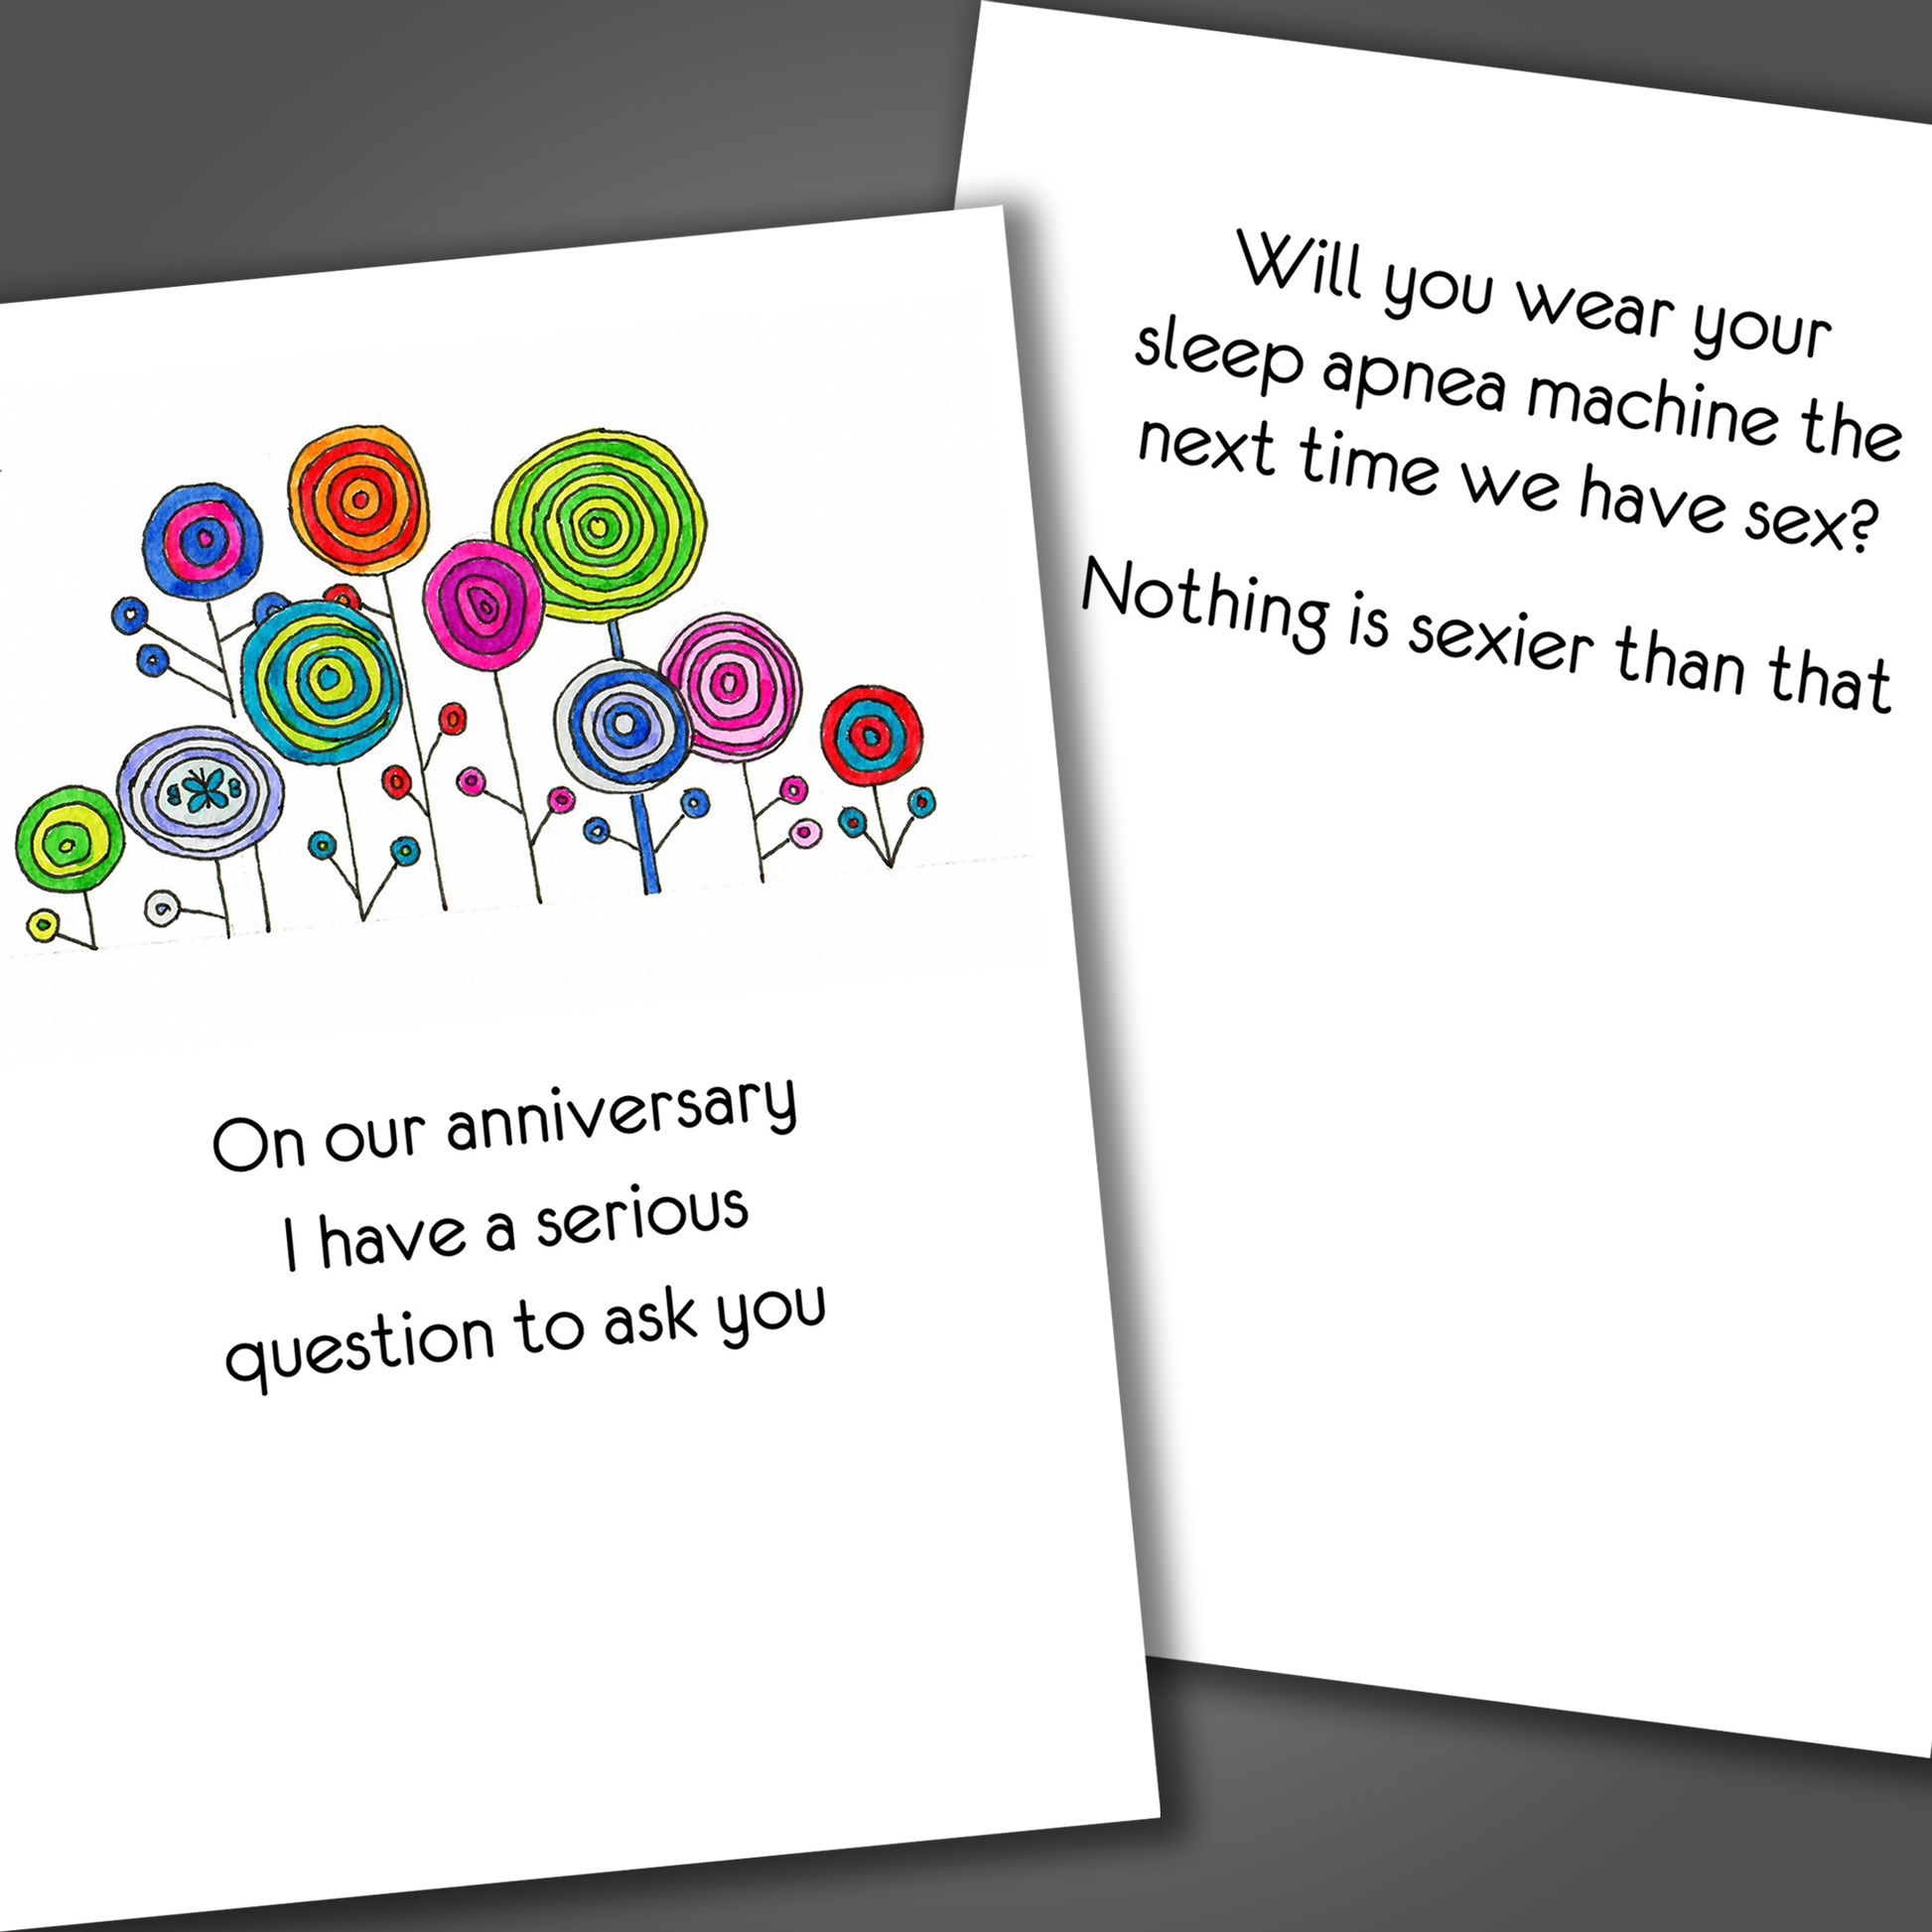 Funny anniversary card with colorful lollipop flowers on front of card and funny joke inside card that says your sleep apnea machine is sexy!